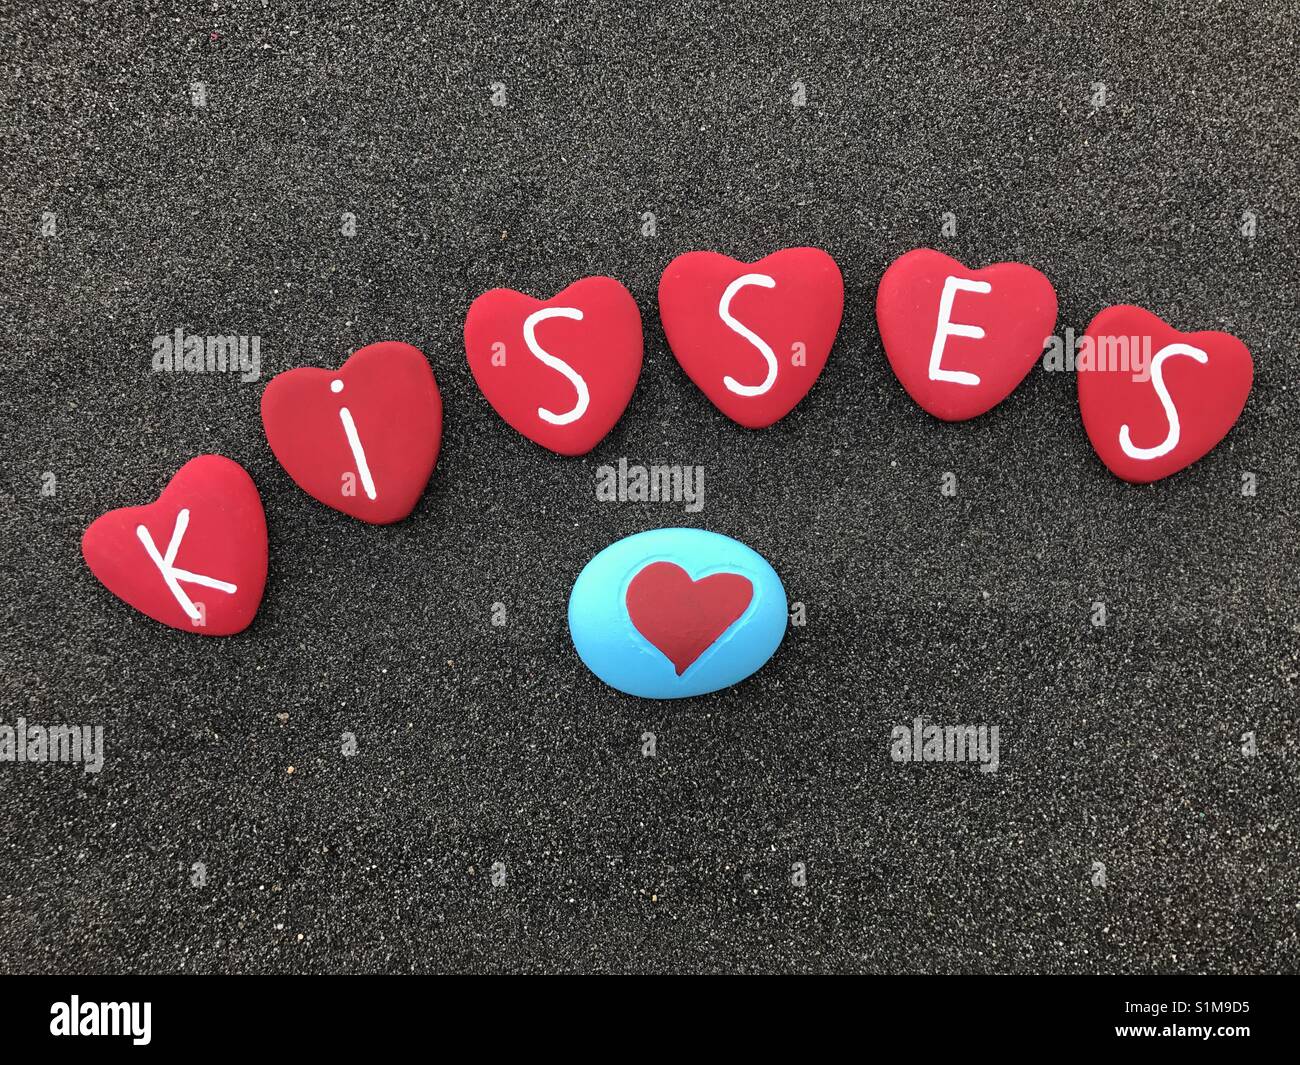 I love you and I send you many kisses with red colored heart stones over black volcanic sand Stock Photo